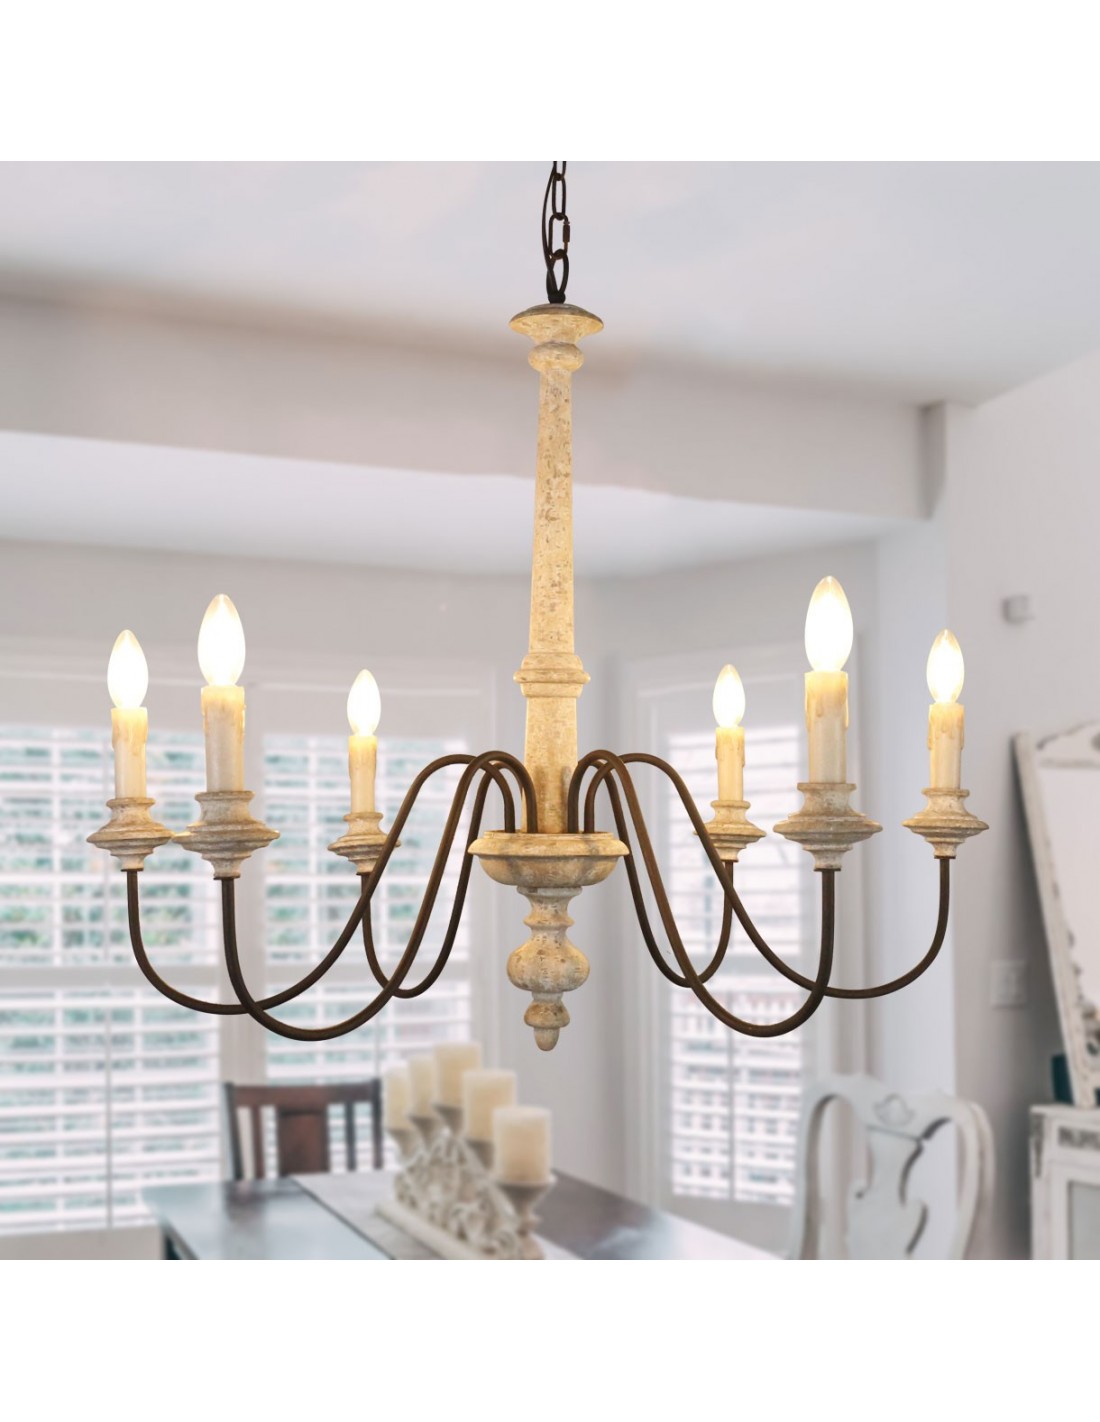 Shabby Chic Distressed White Wooden Chandelier, 6-Light French Country ...